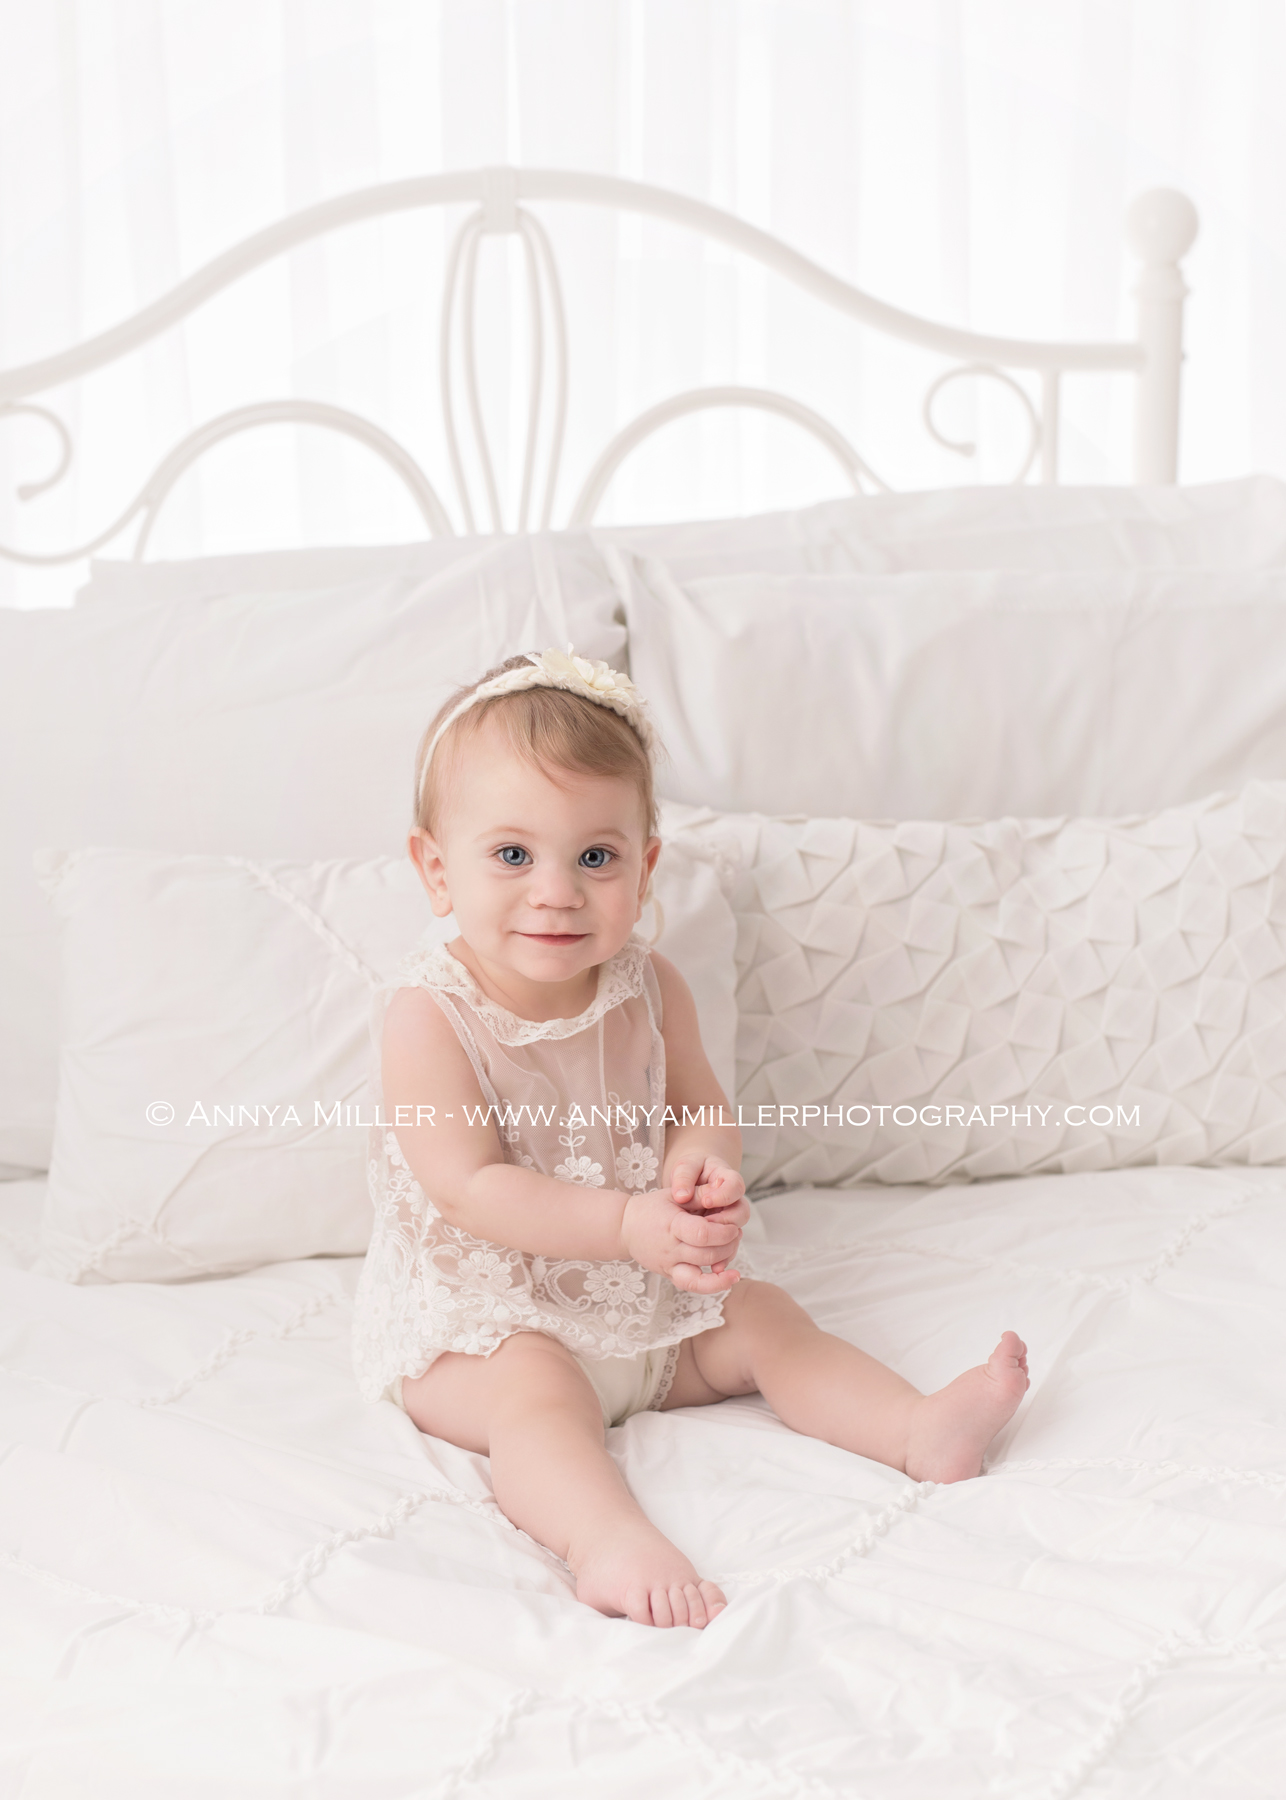 Photograph of baby girl on a white bed by Pickering photographer Annya Miller 